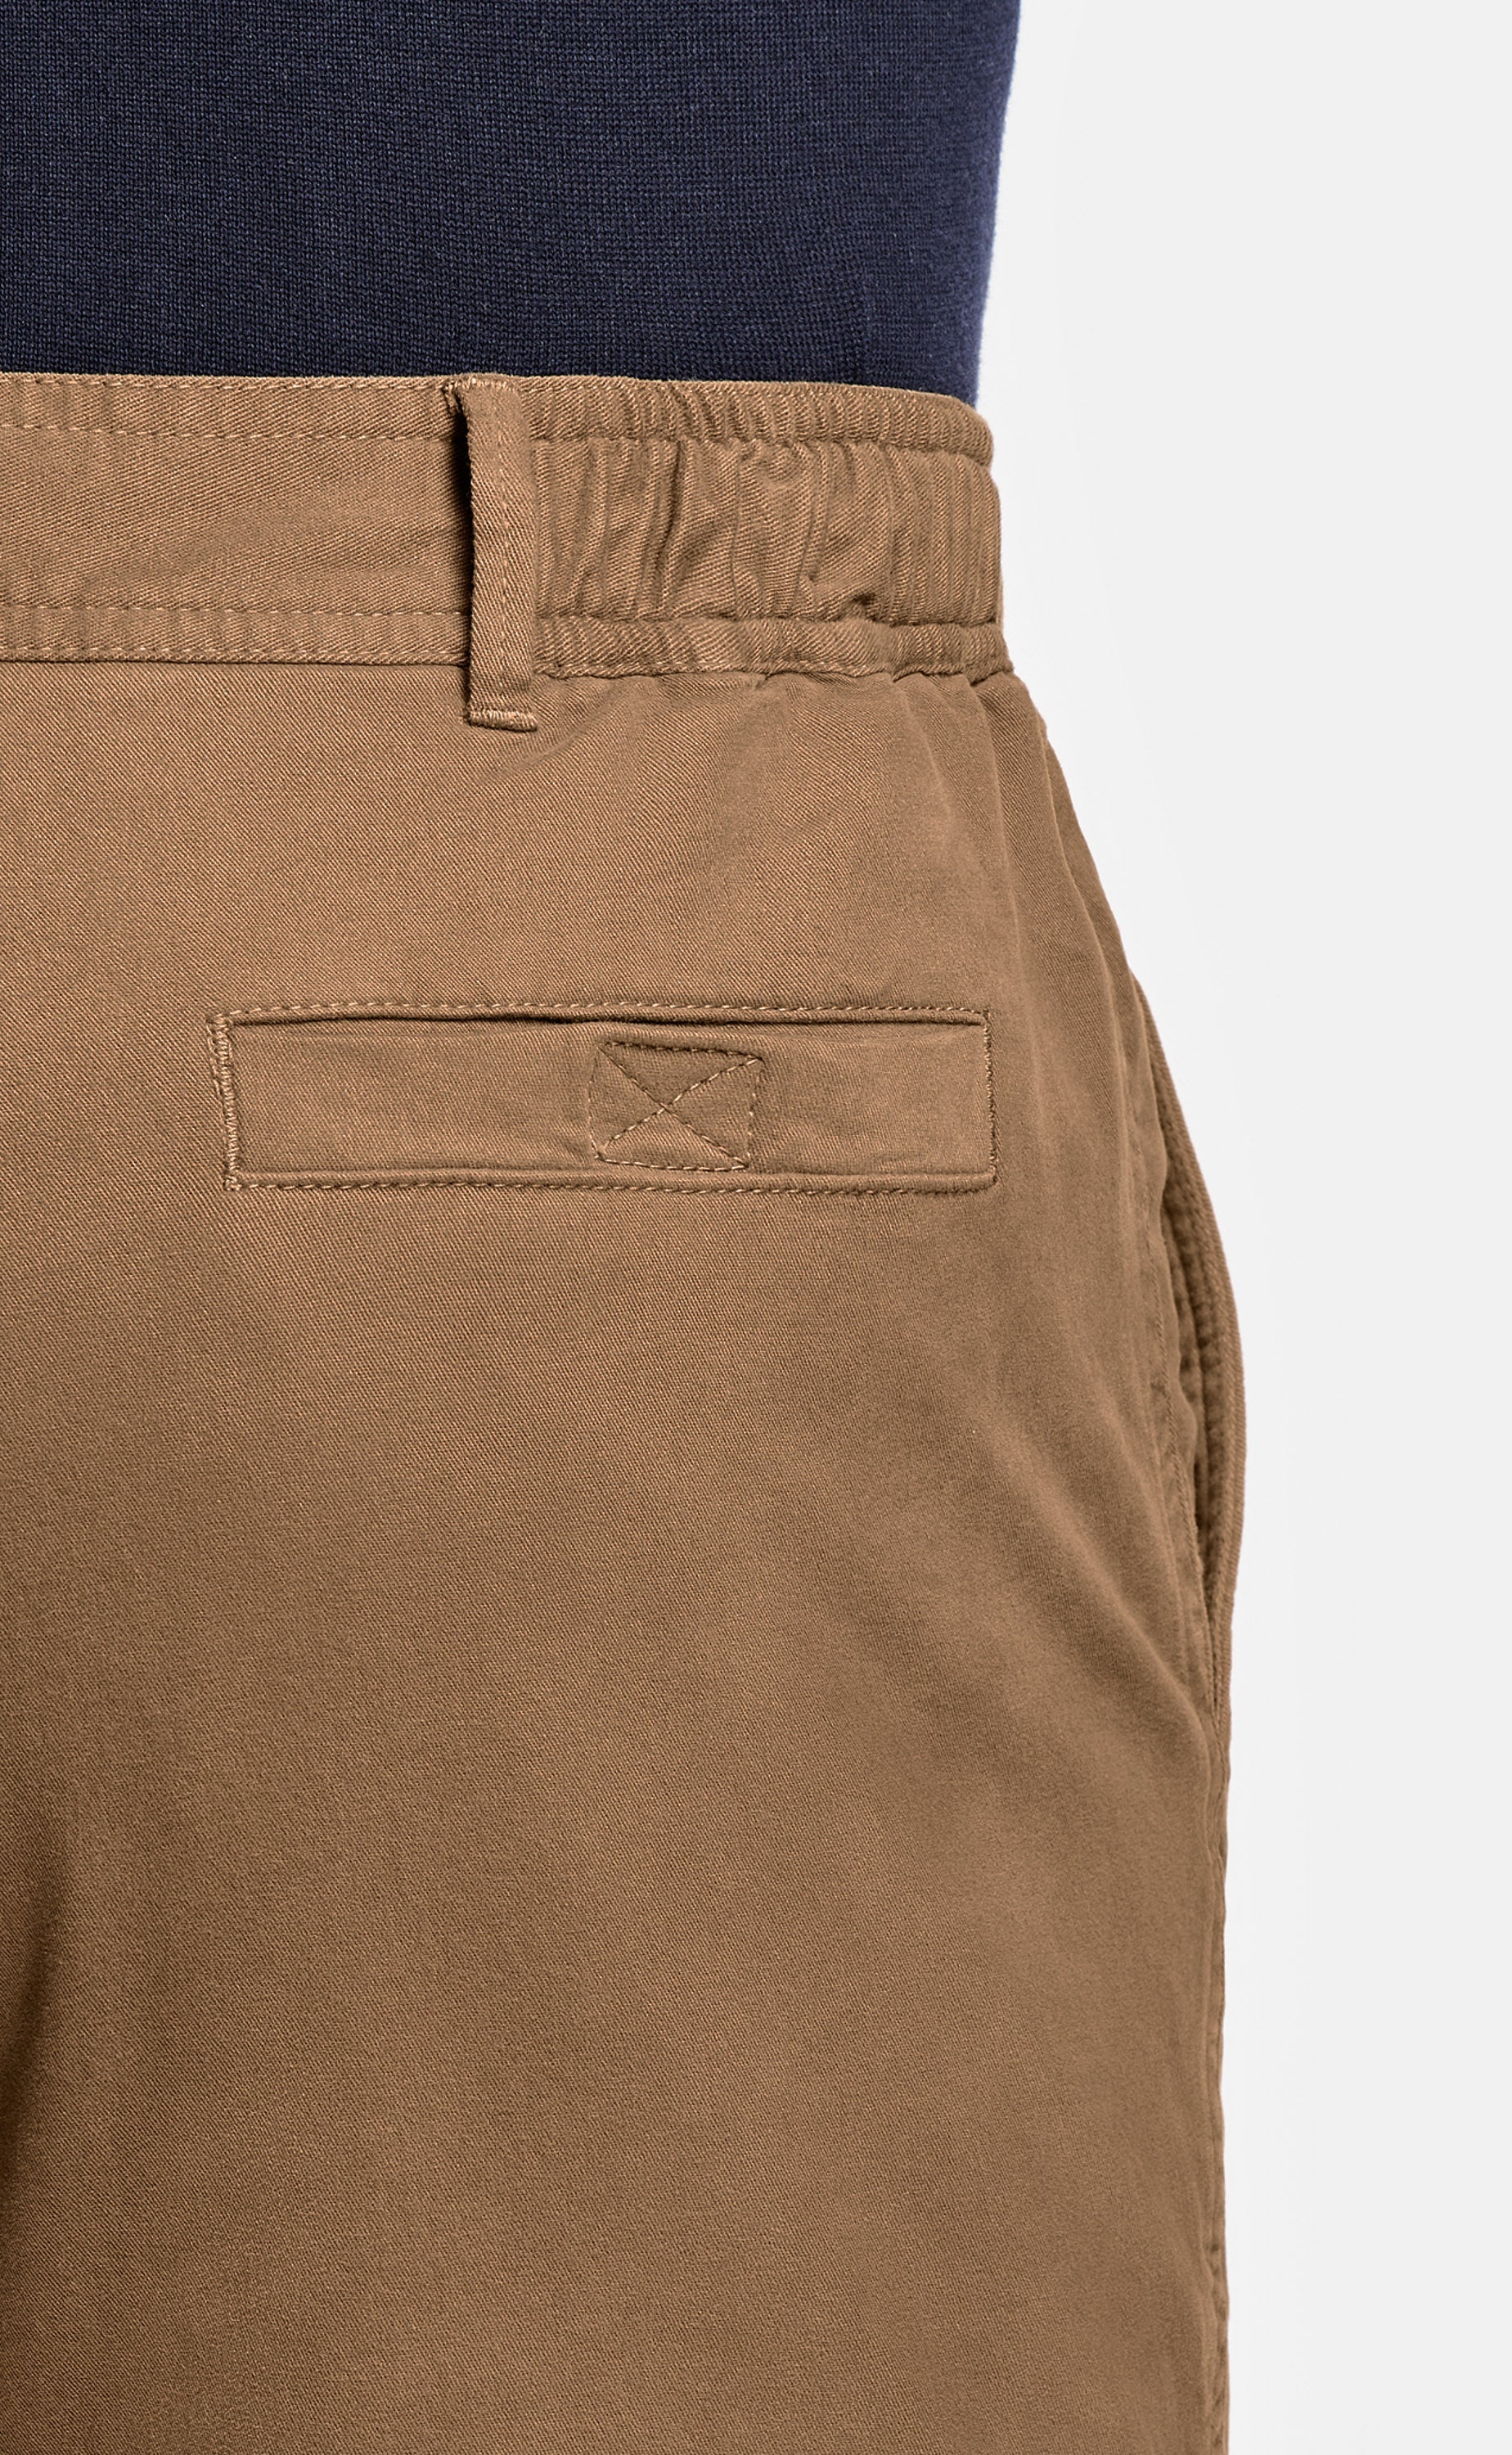 The Jones | MR MARVIS Shorts | Brown | Stretch Cotton